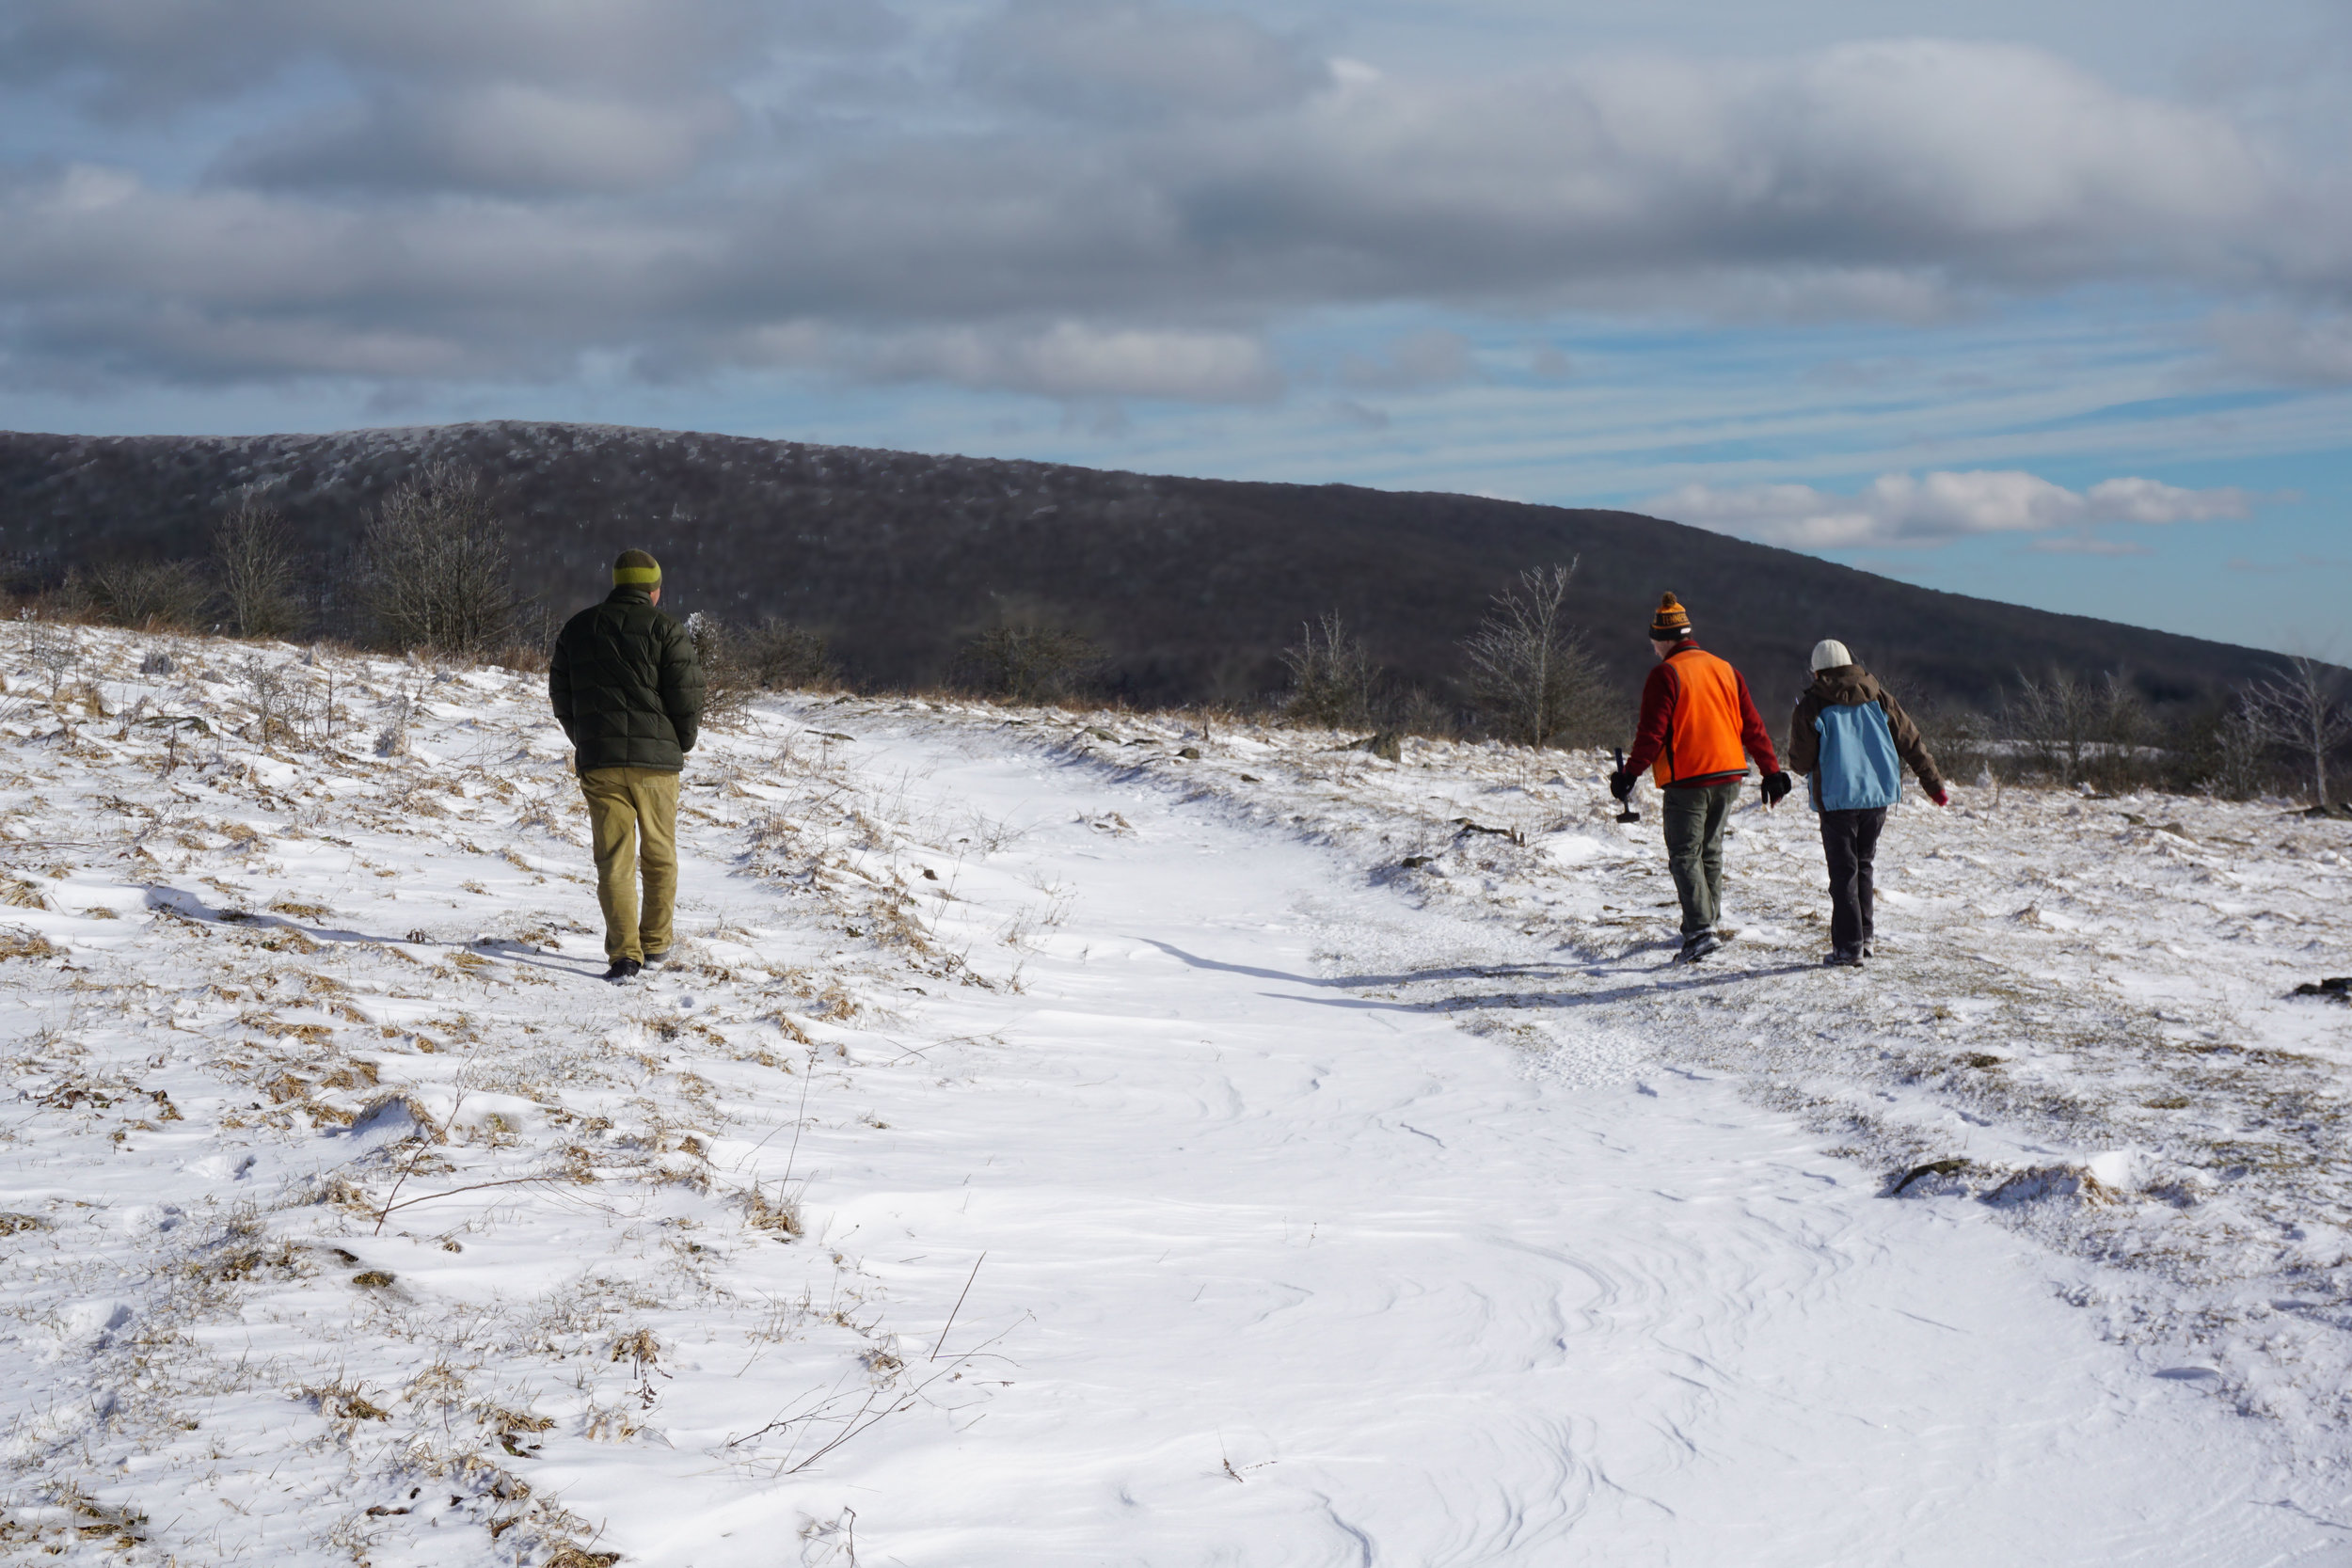 The Appalachian Trail under a blanket of drifted snow.